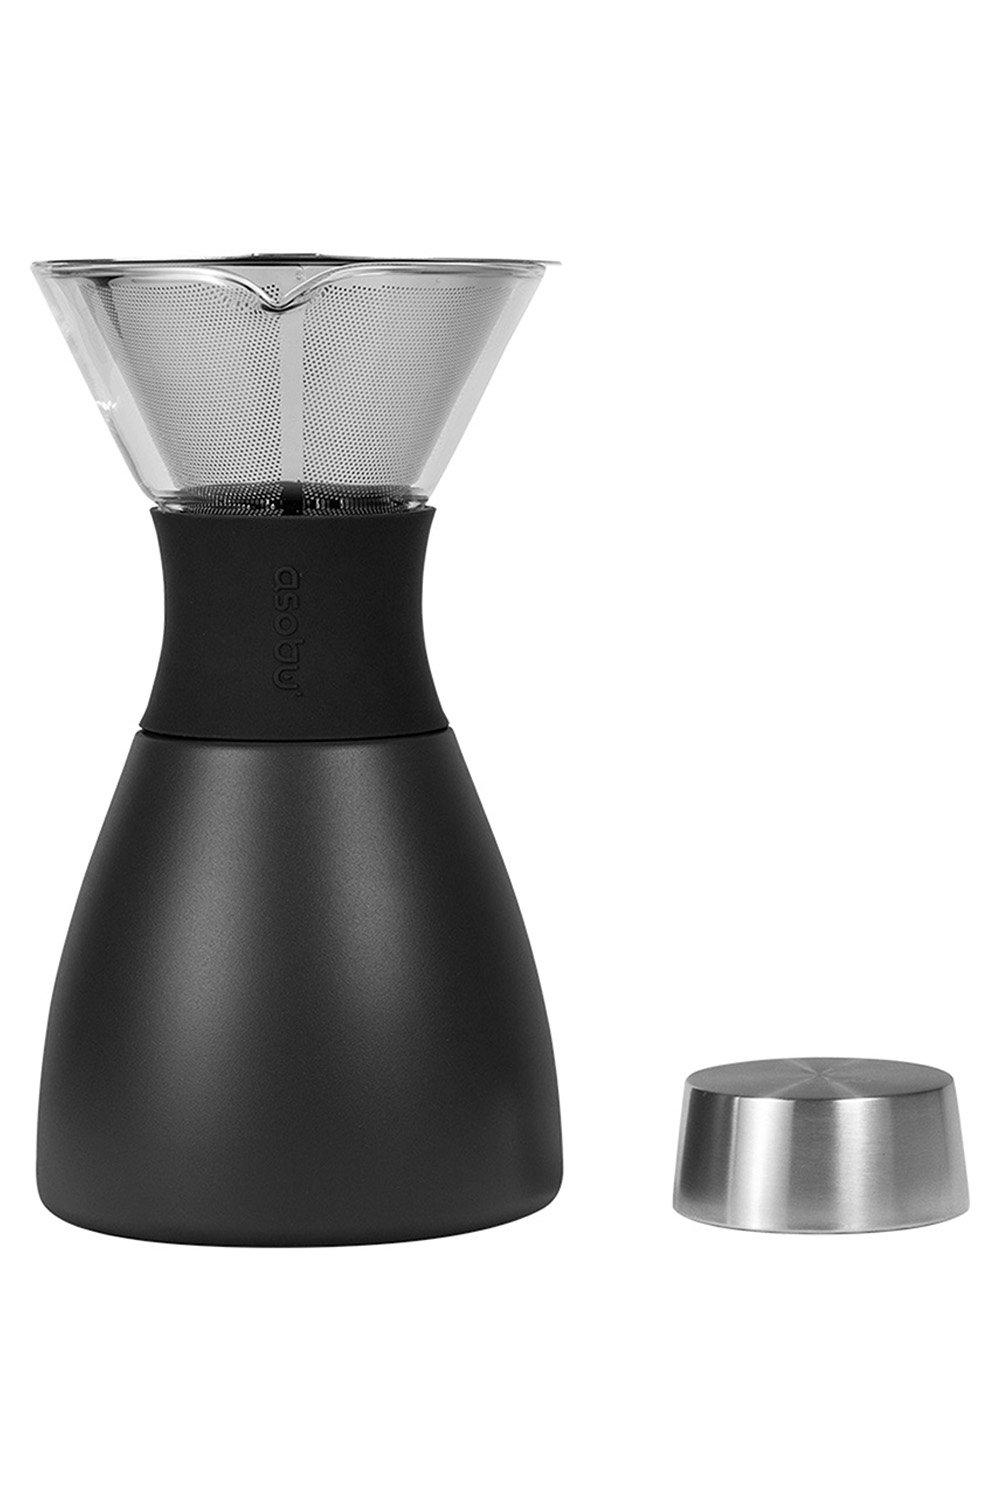 Pour Over Coffee Maker 1000ml Black